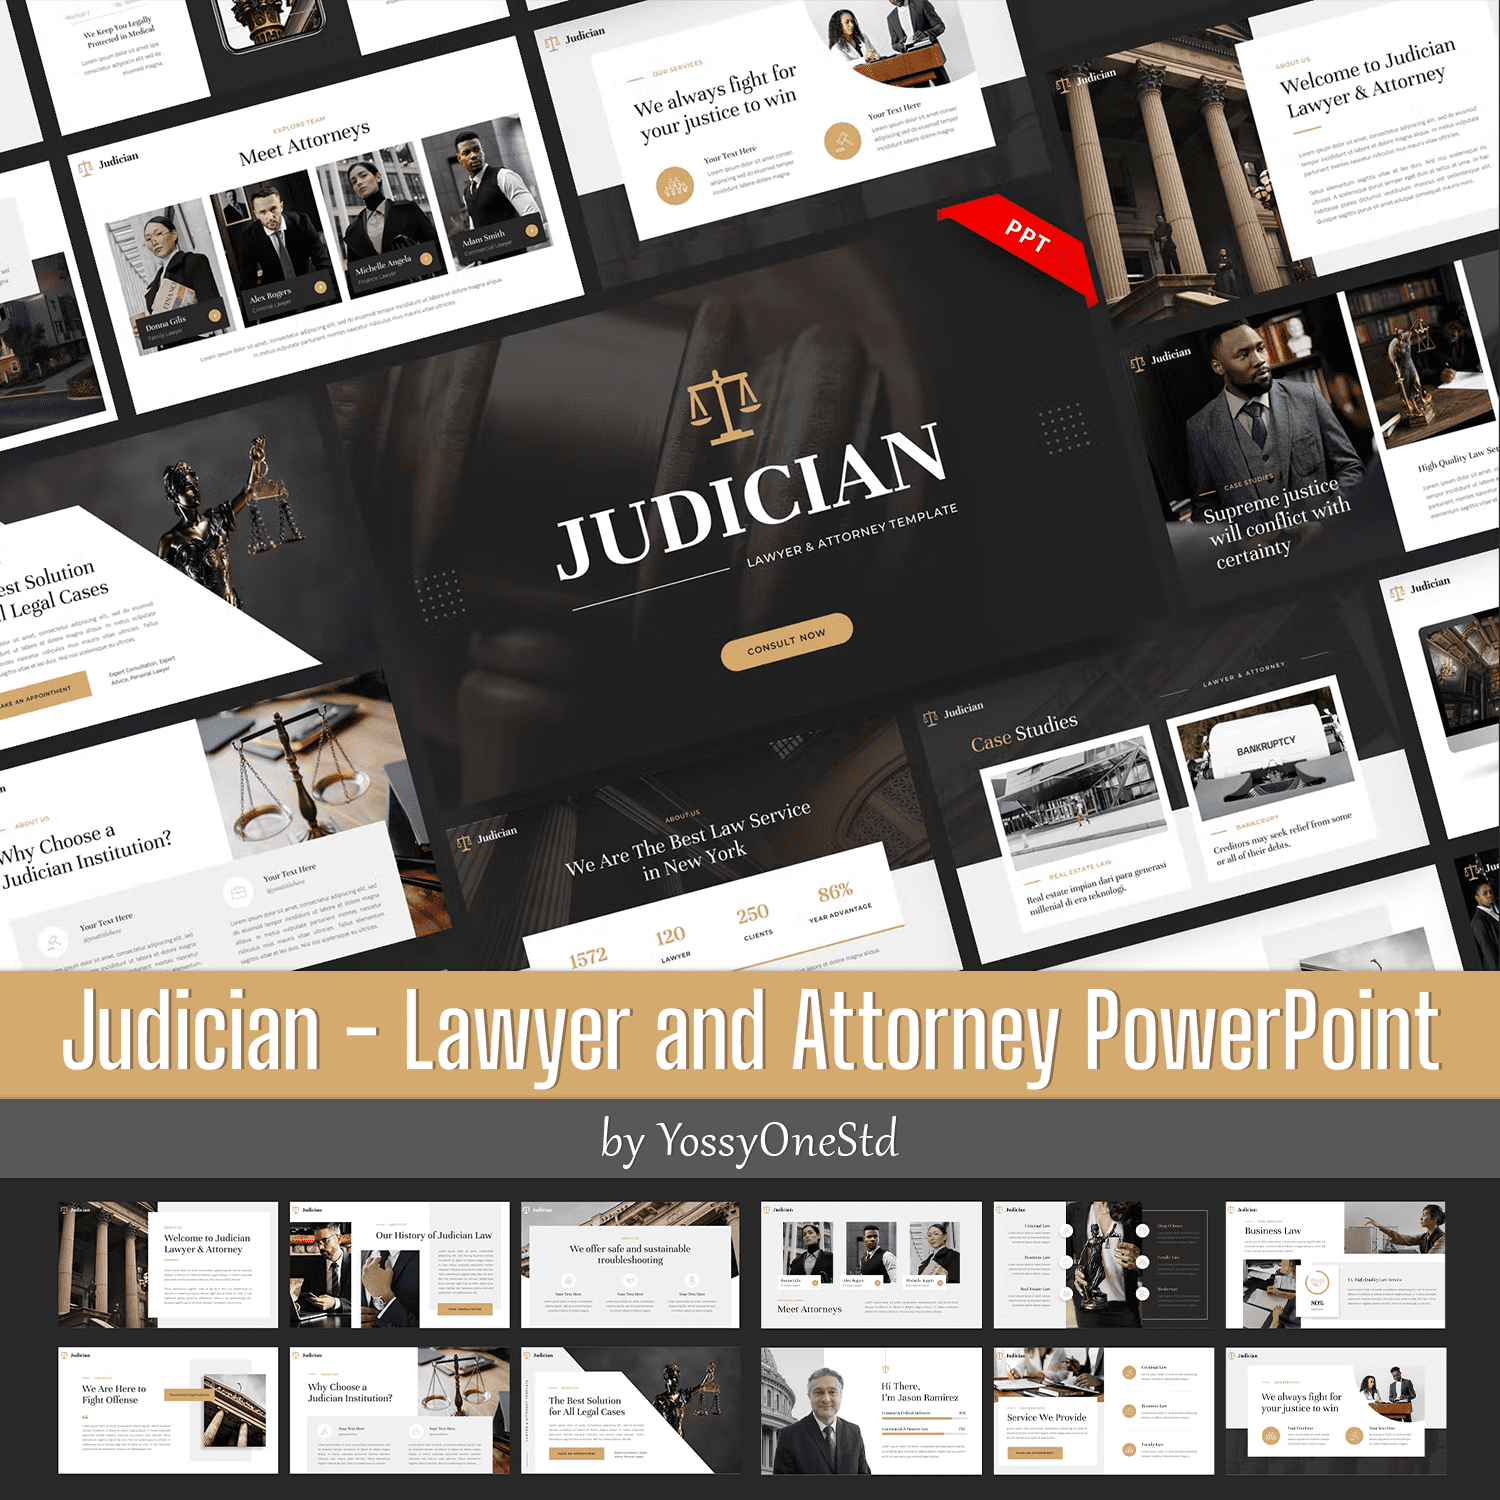 Prints of judician lawyer and attorney powerpoint.